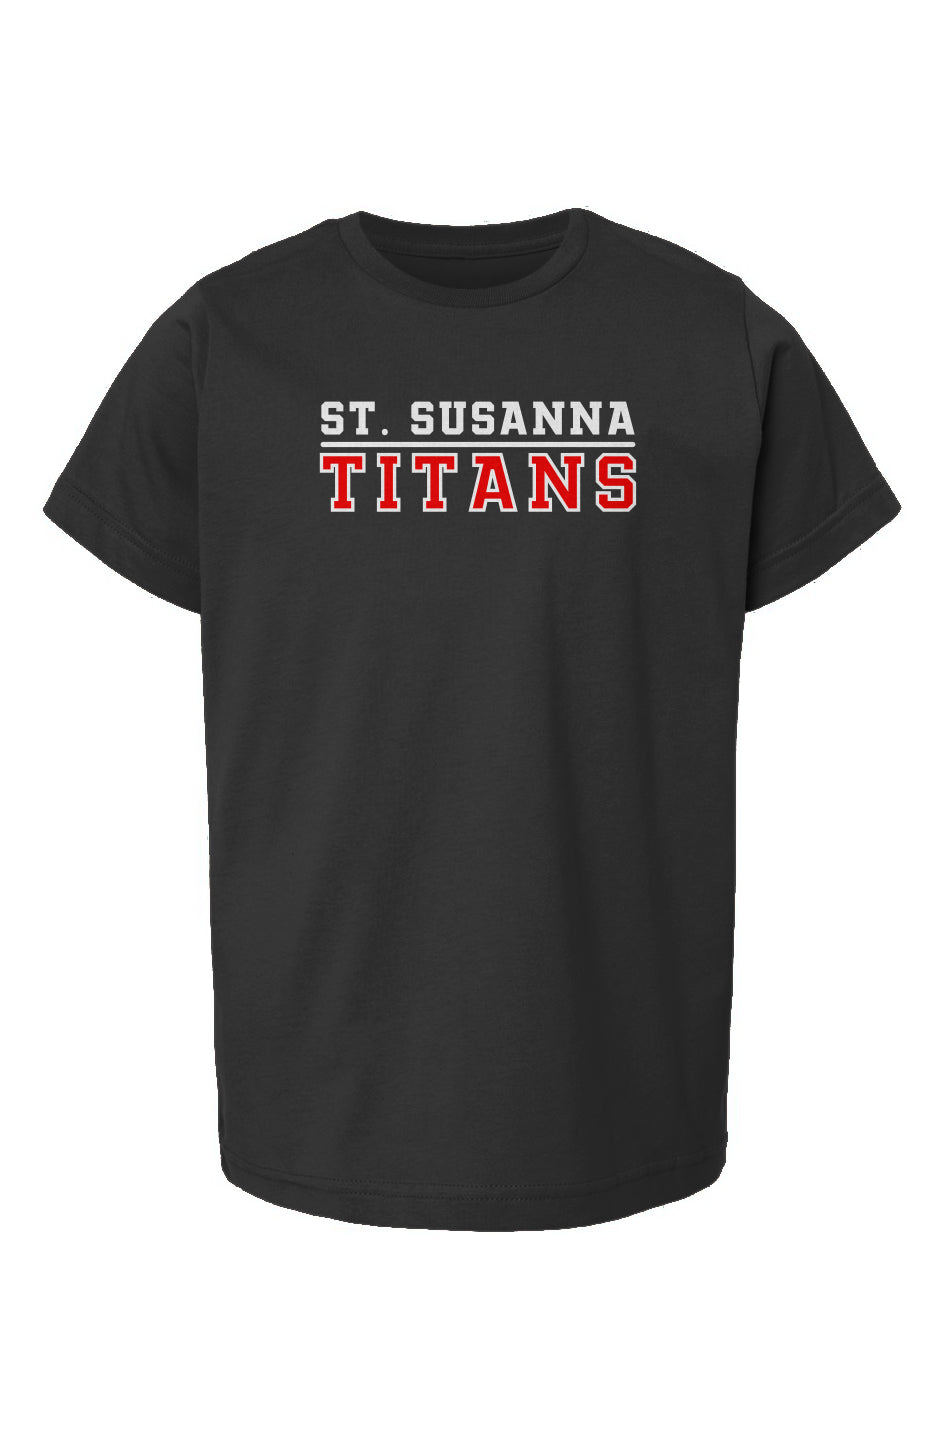 St. Susanna Titans (White/Red) Youth Fine Jersey T-Shirt